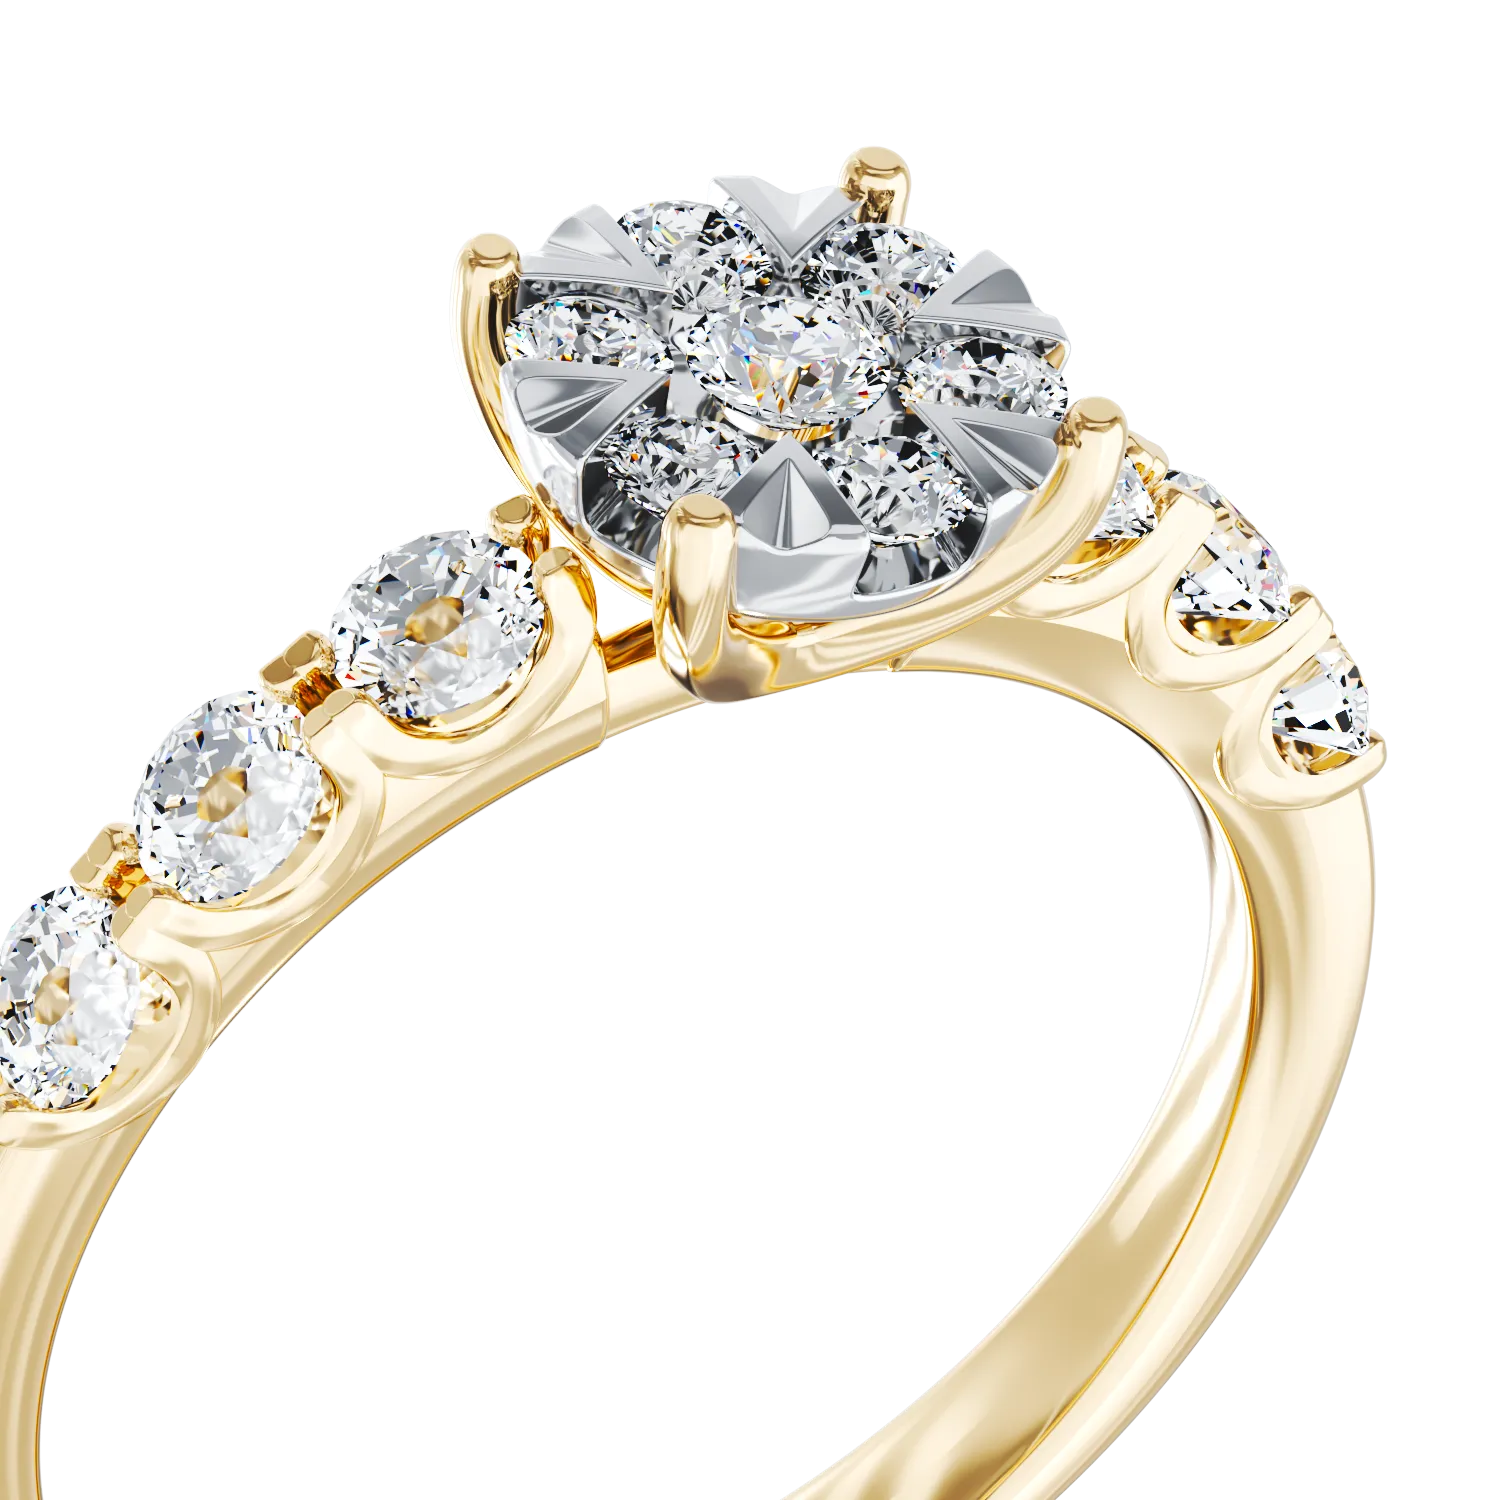 18K yellow gold engagement ring with diamonds of 0.84ct